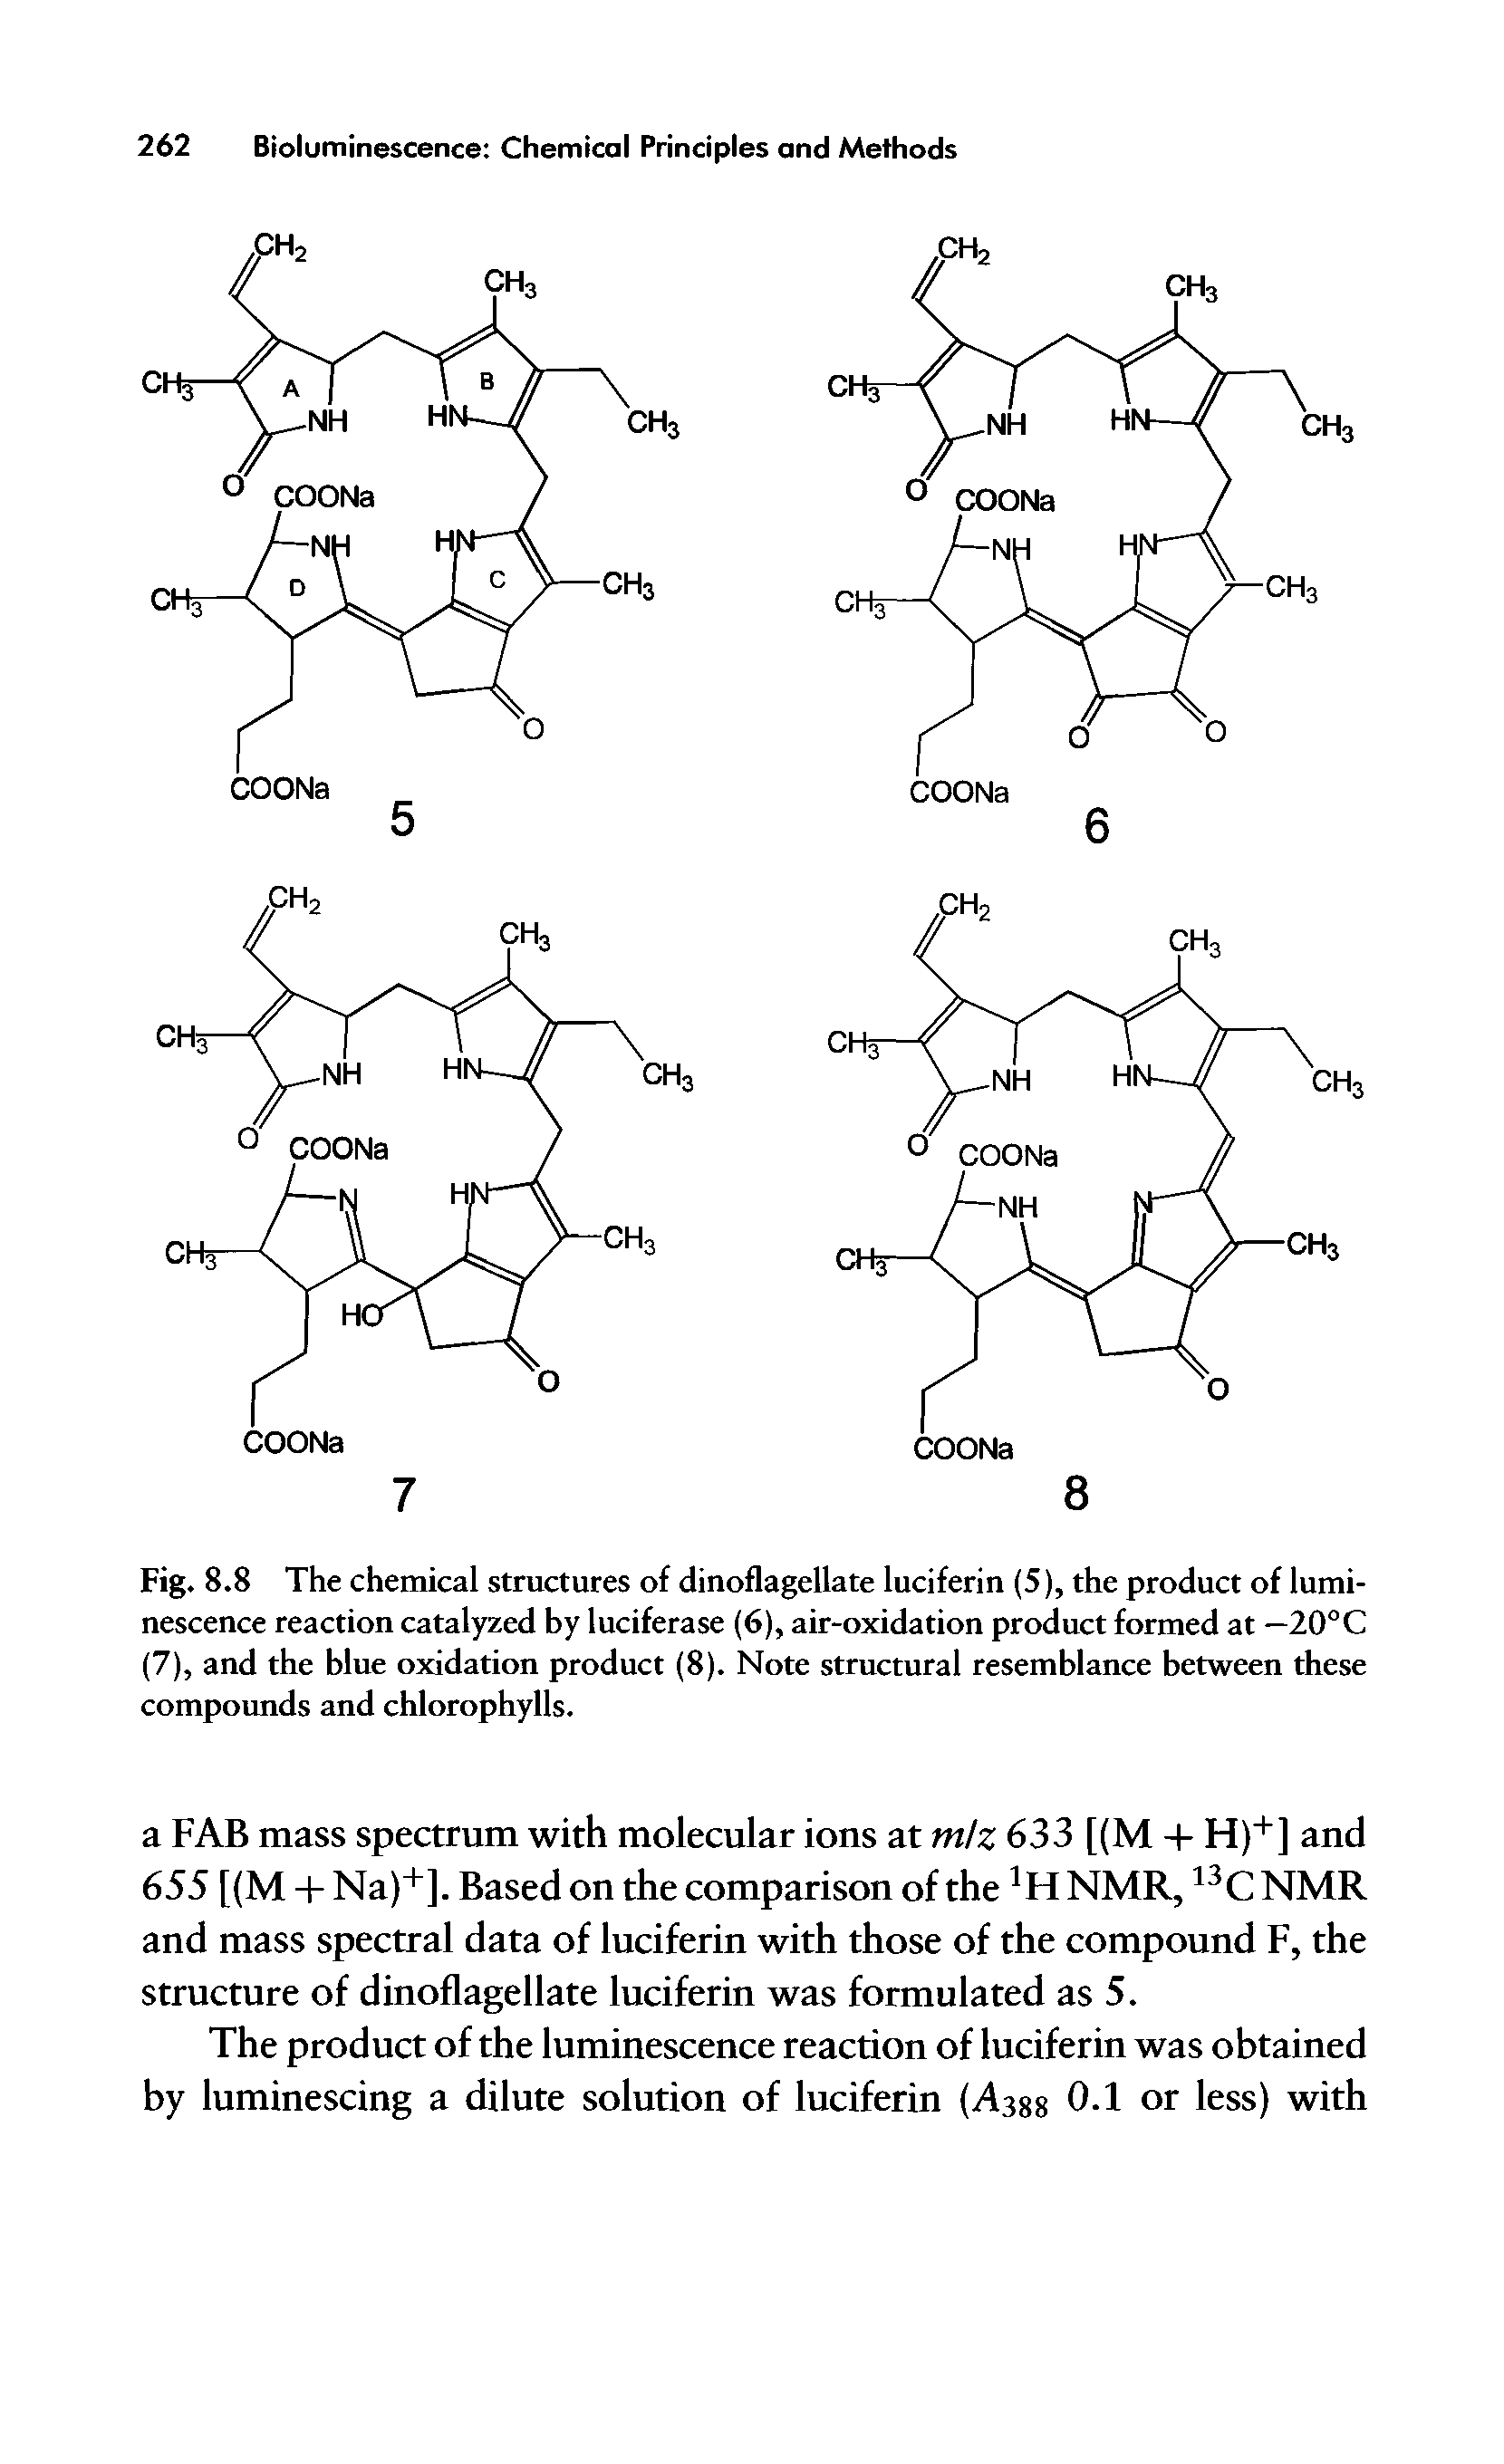 Fig. 8.8 The chemical structures of dinoflagellate luciferin (5), the product of luminescence reaction catalyzed by luciferase (6), air-oxidation product formed at — 20°C (7), and the blue oxidation product (8). Note structural resemblance between these compounds and chlorophylls.